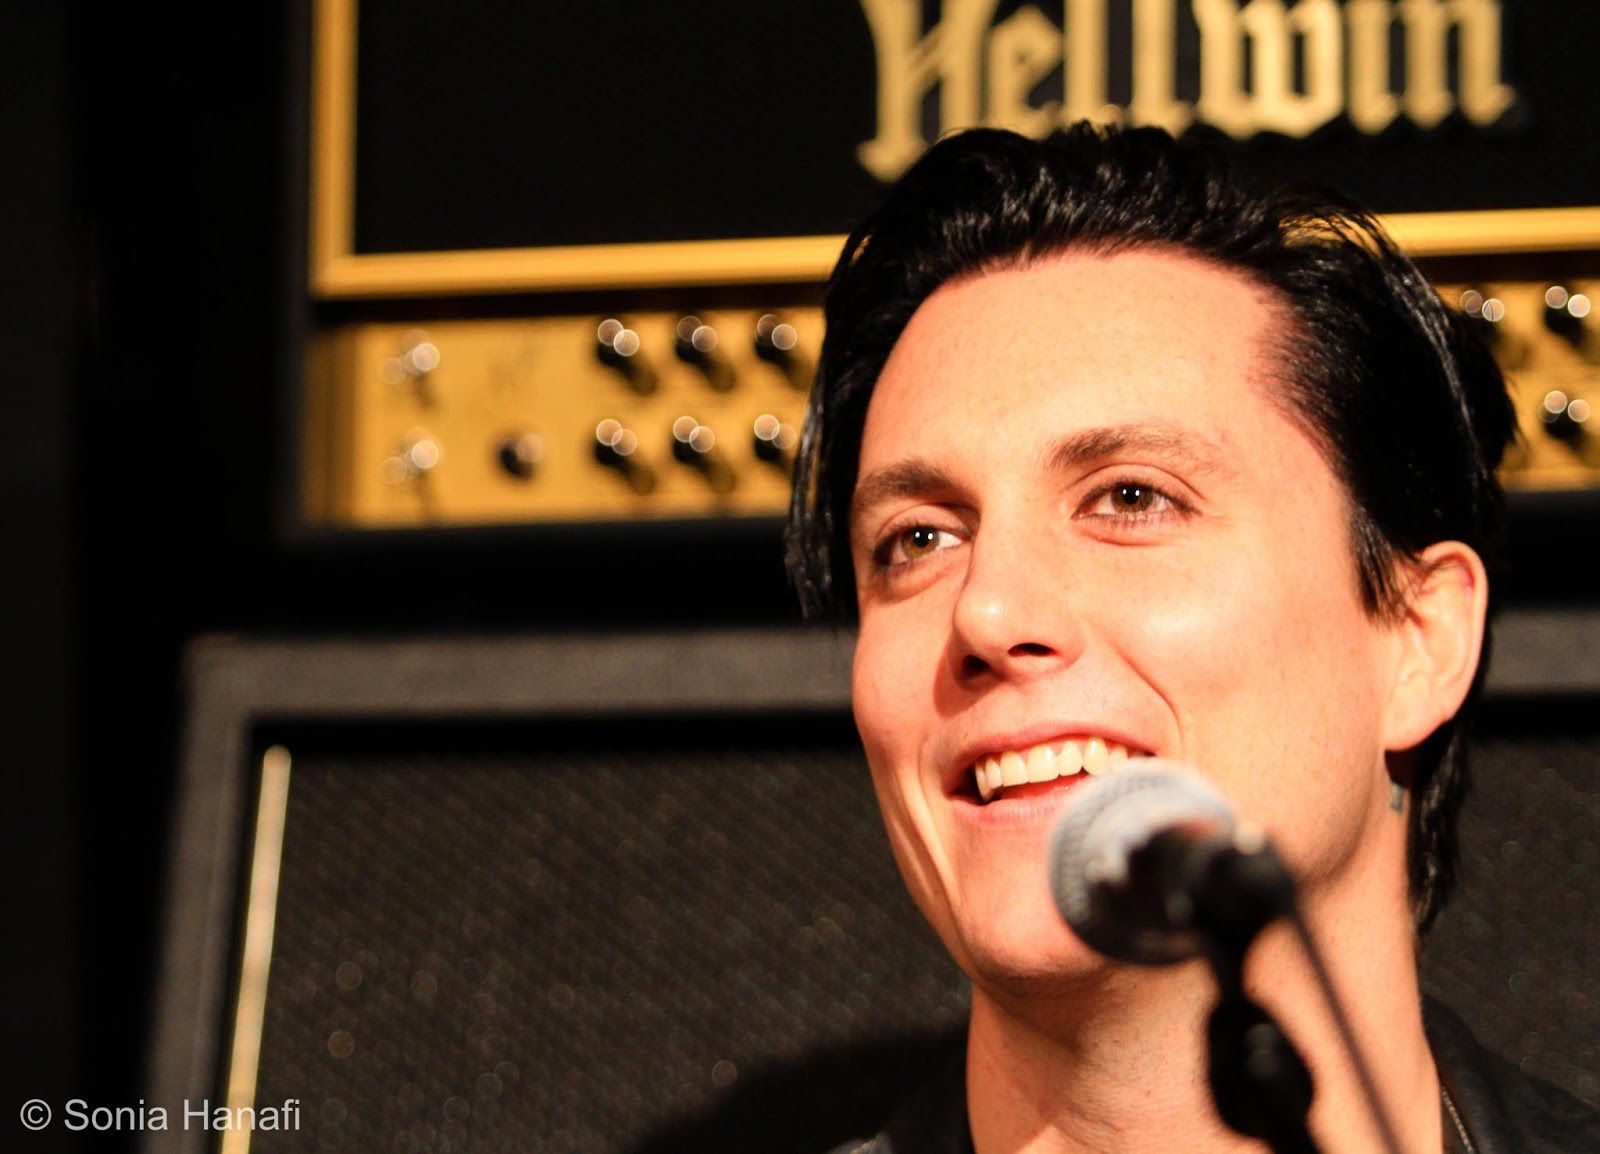 Synyster Gates 2015 Wallpapers 1600x1154